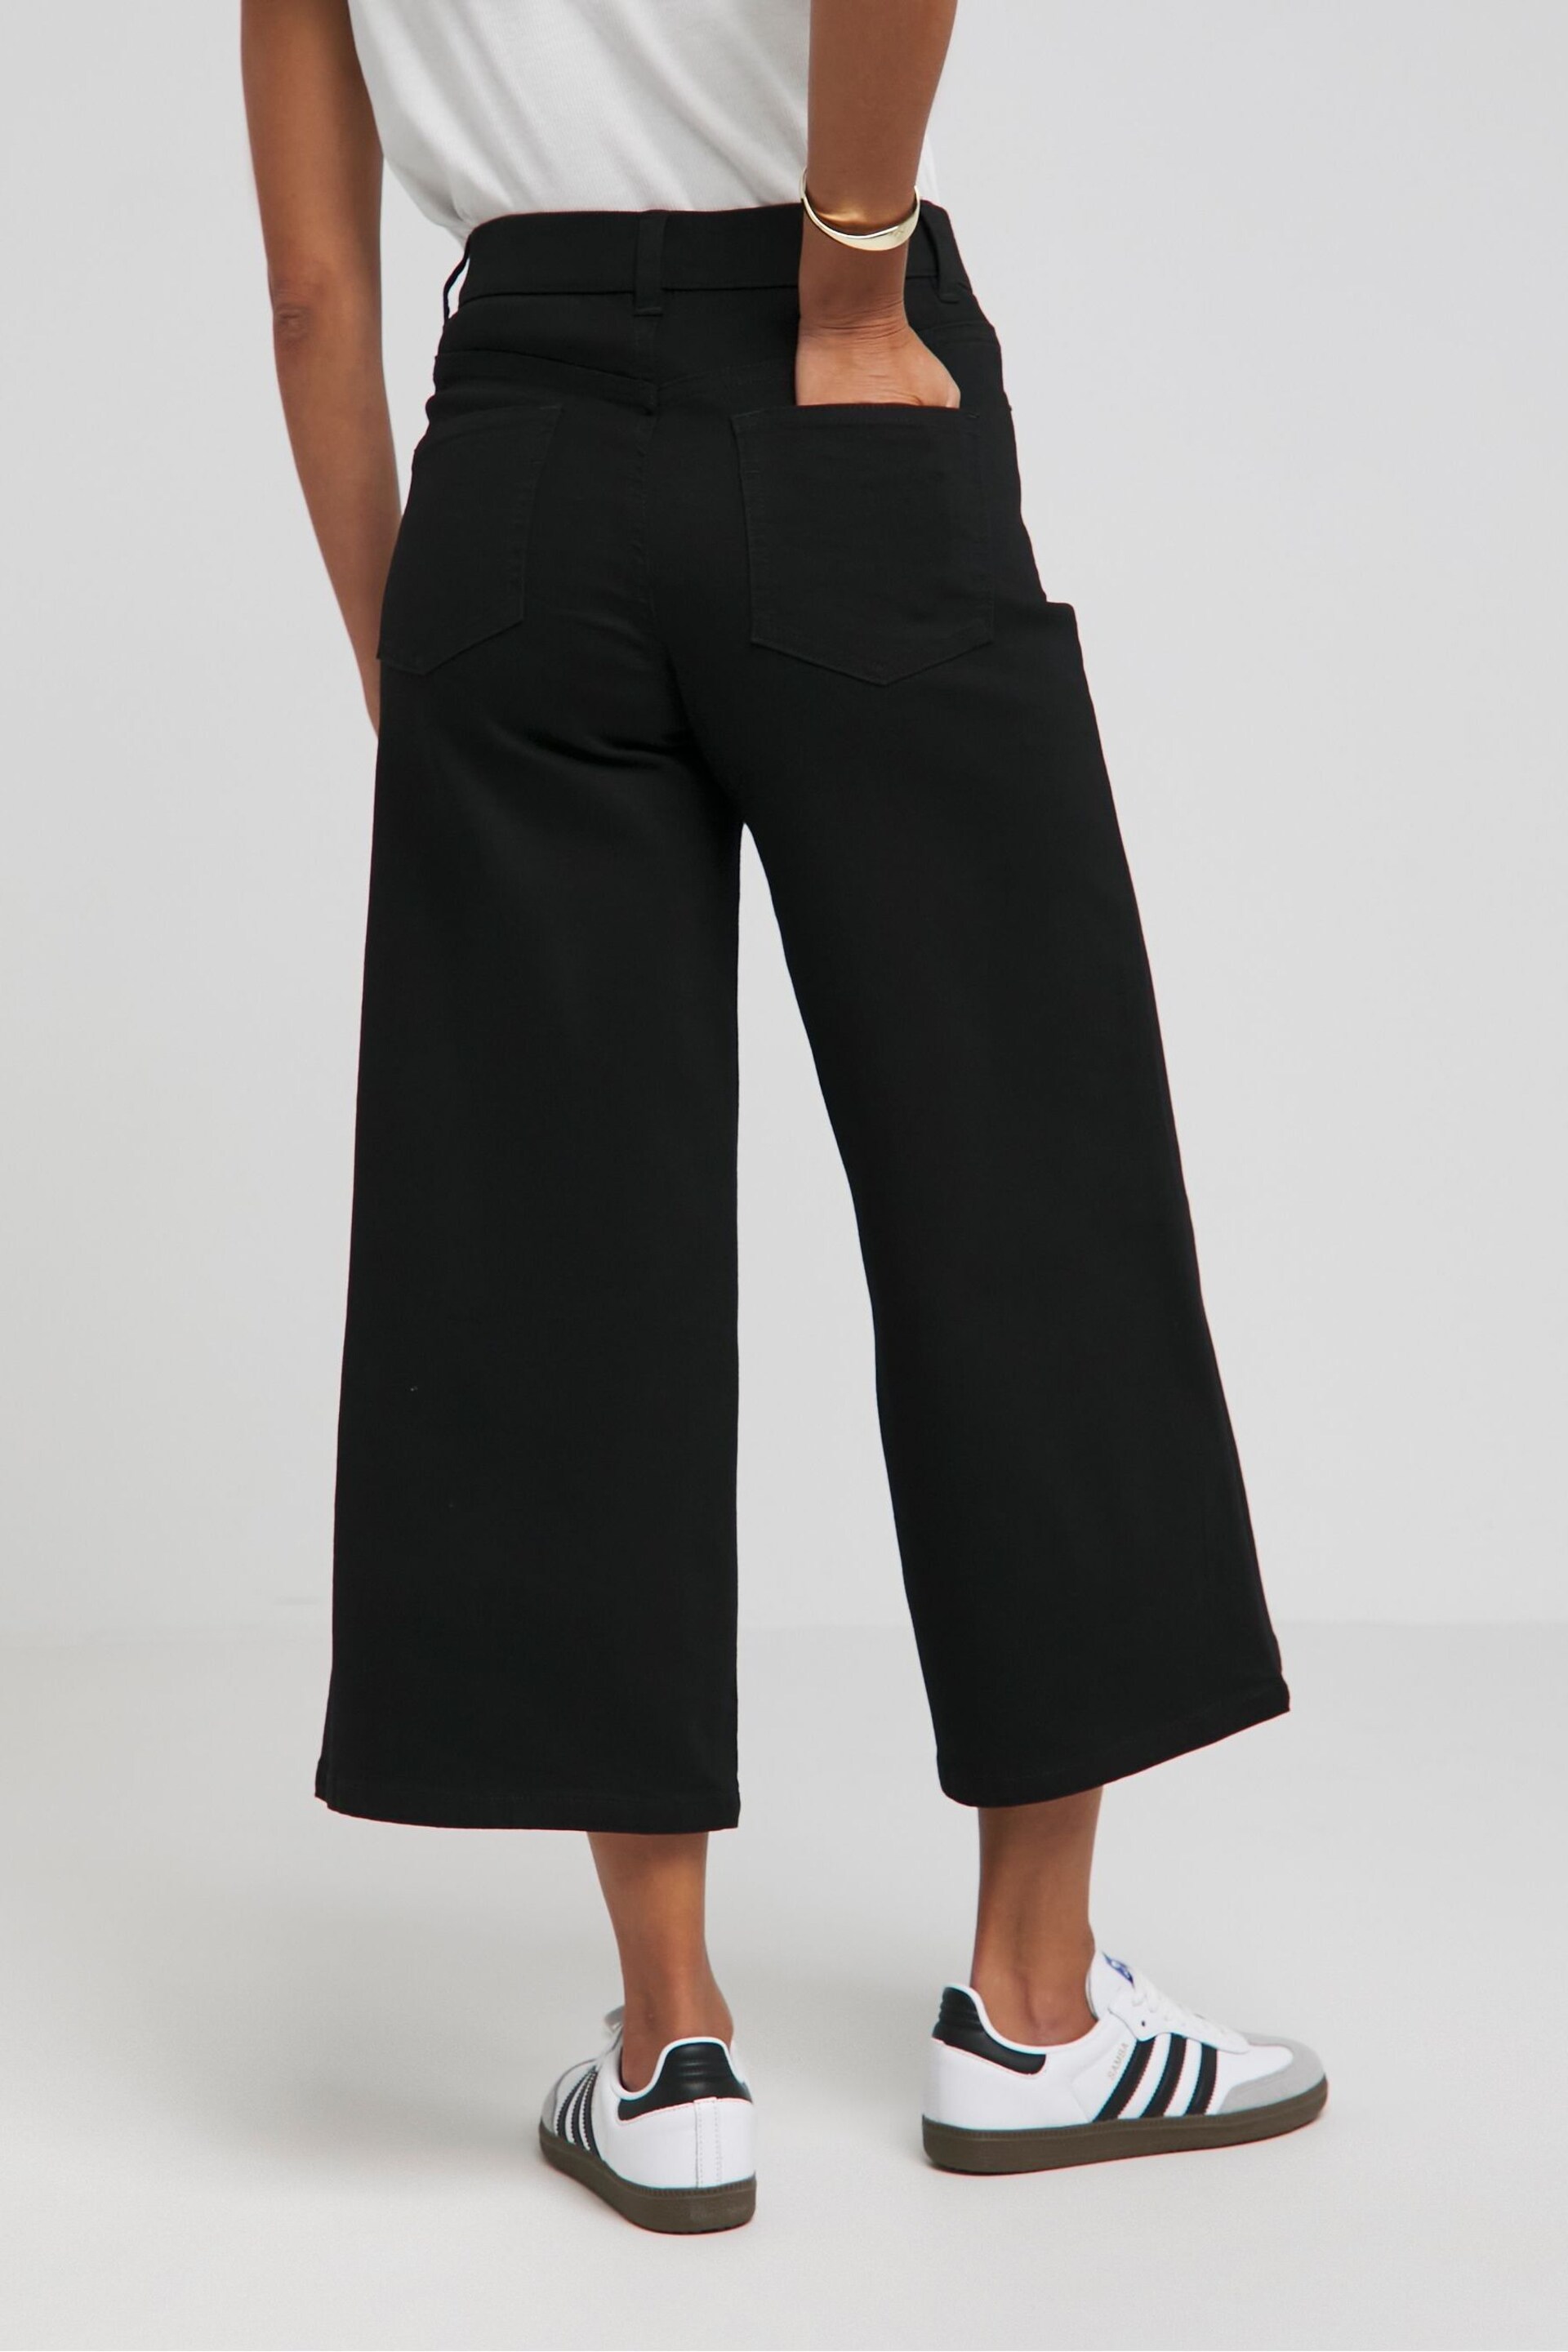 Simply Be Black 24/7 Cropped Wide Leg Jeans - Image 2 of 4